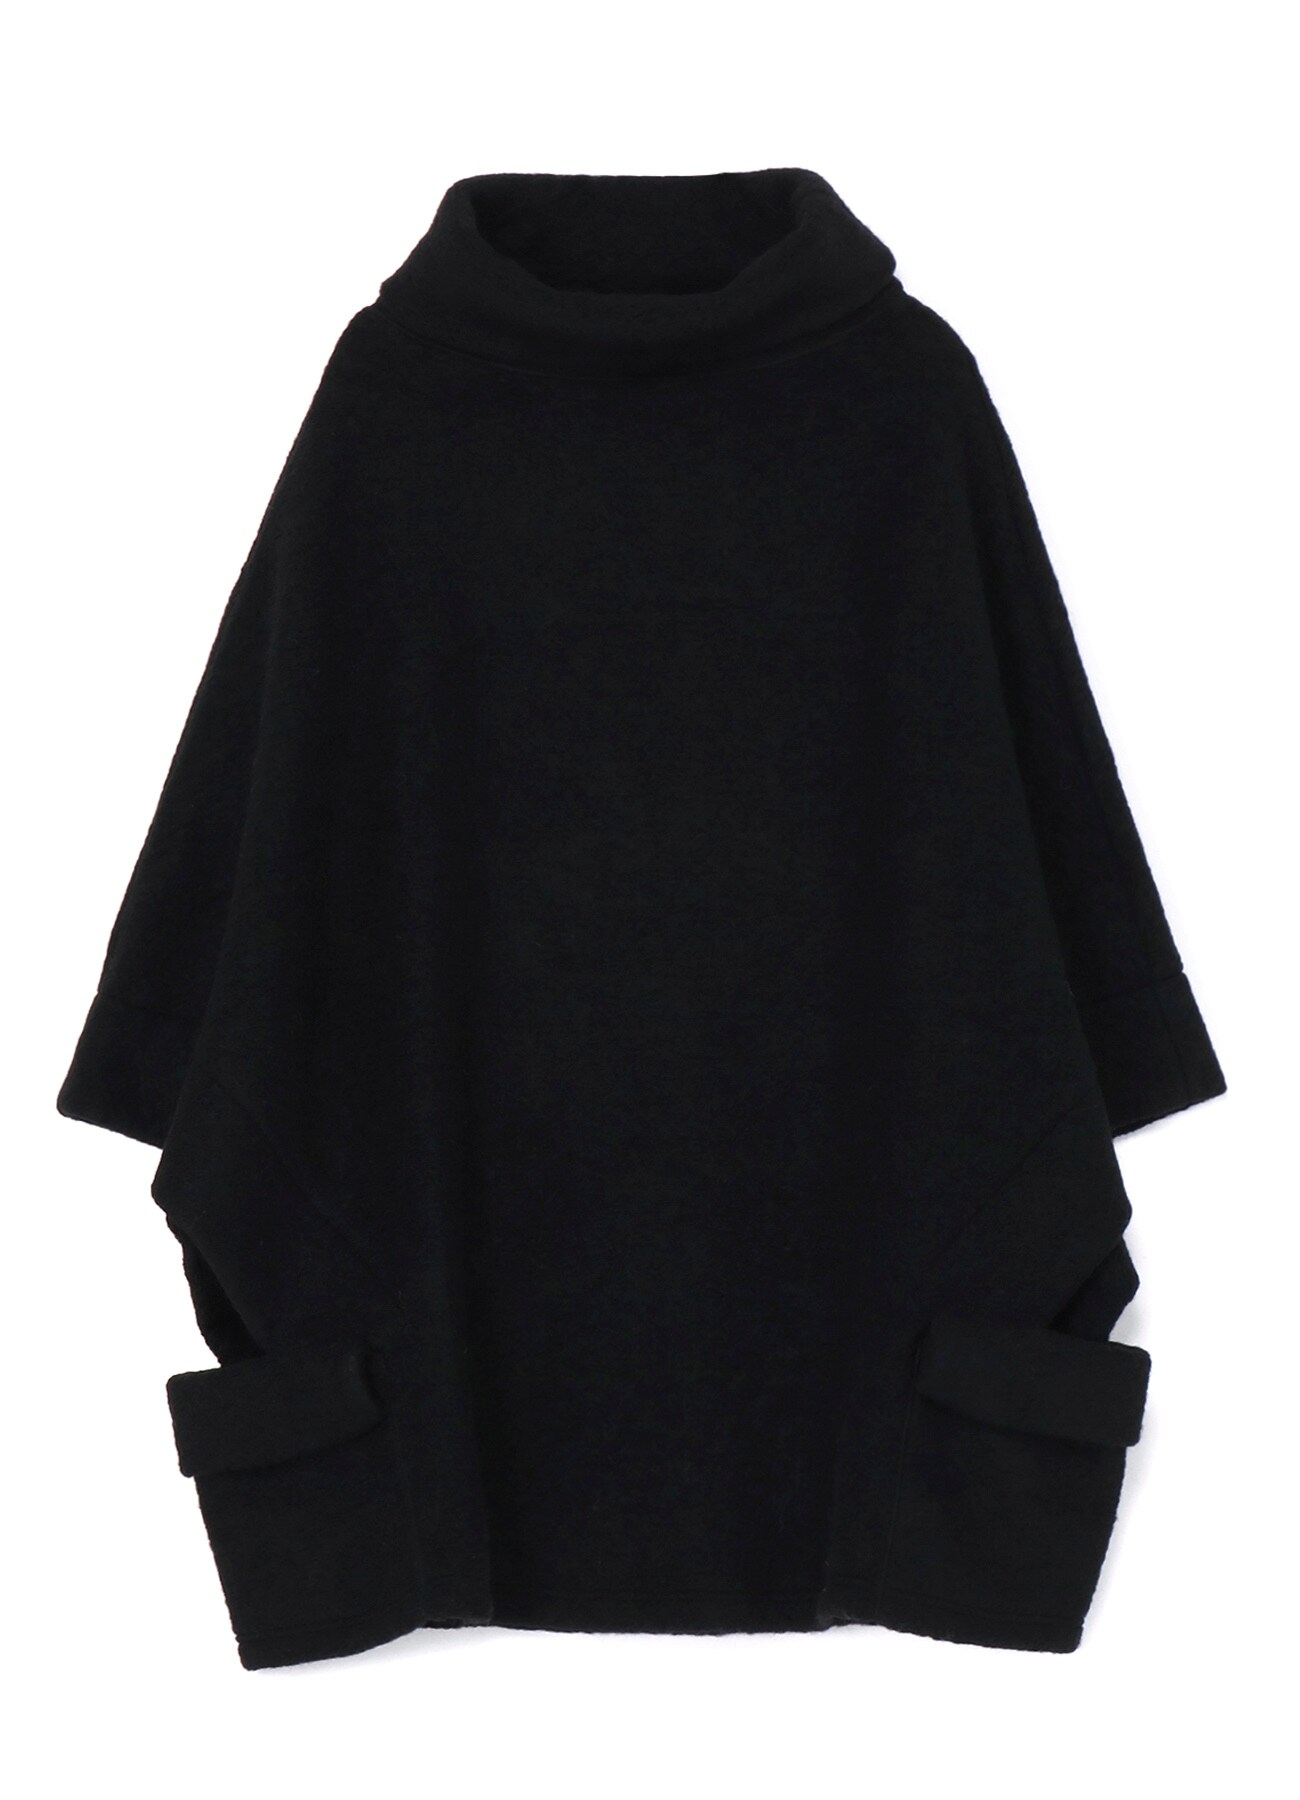 Airy jersey High neck cape T